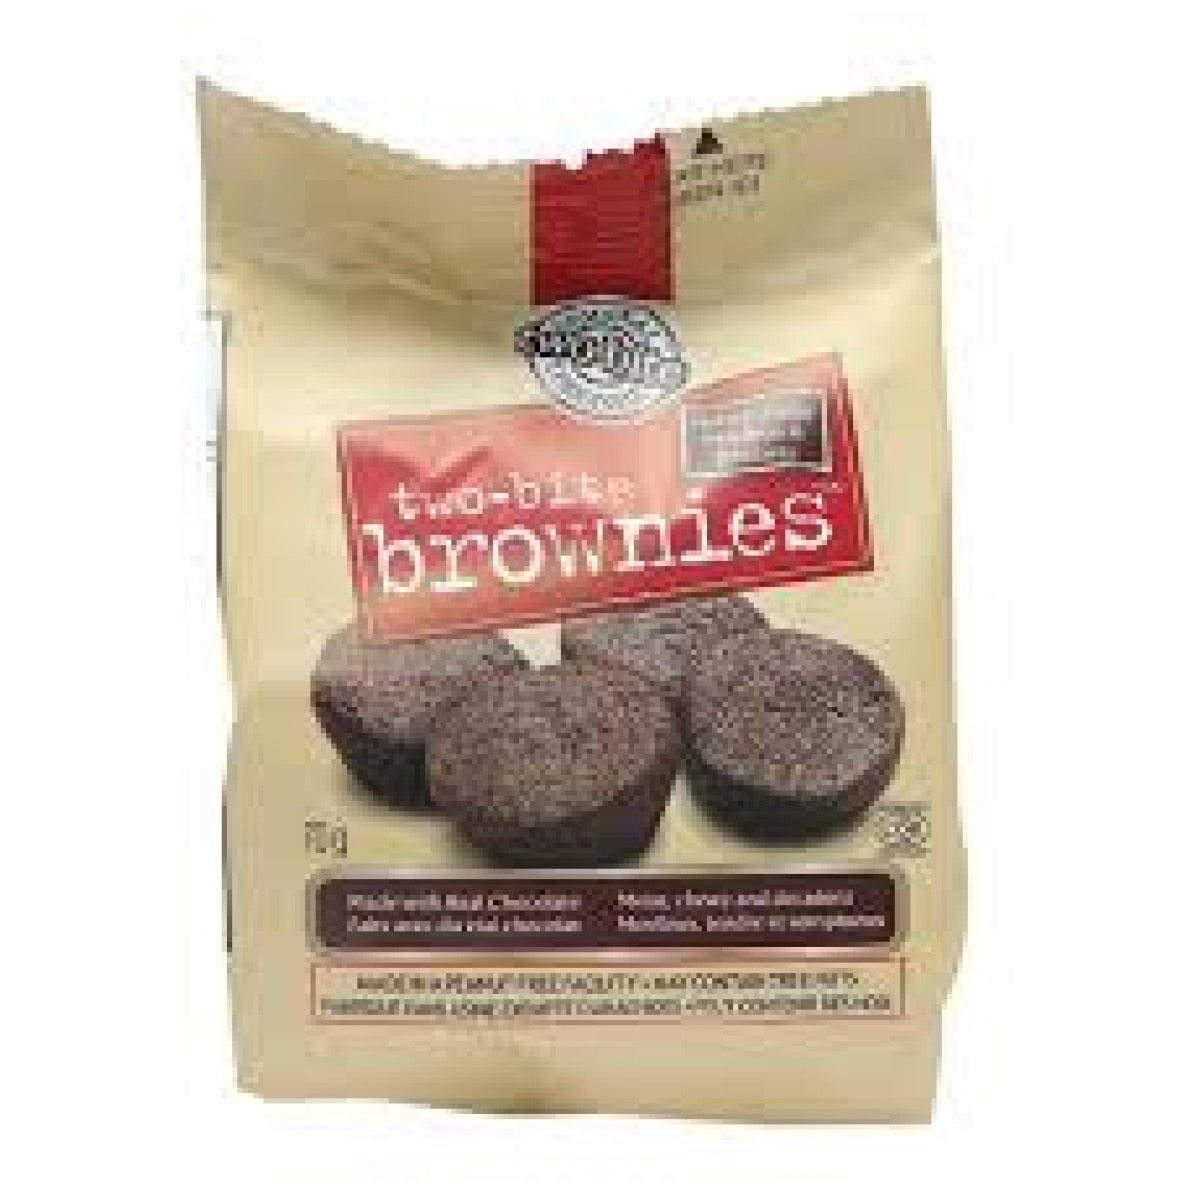 Two-bite Brownies, 70 g